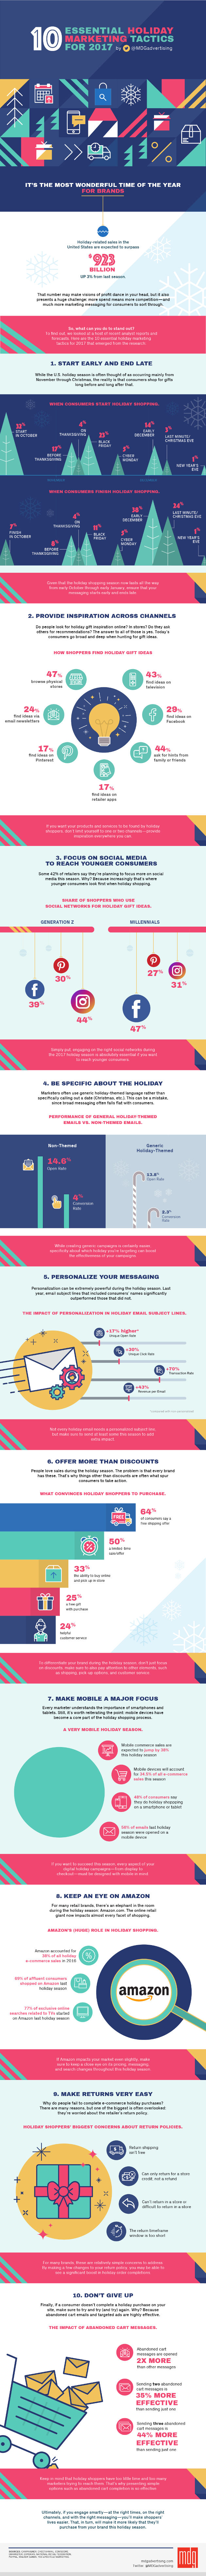 10 Essential Holiday Marketing Tactics for 2017 [Infographic]